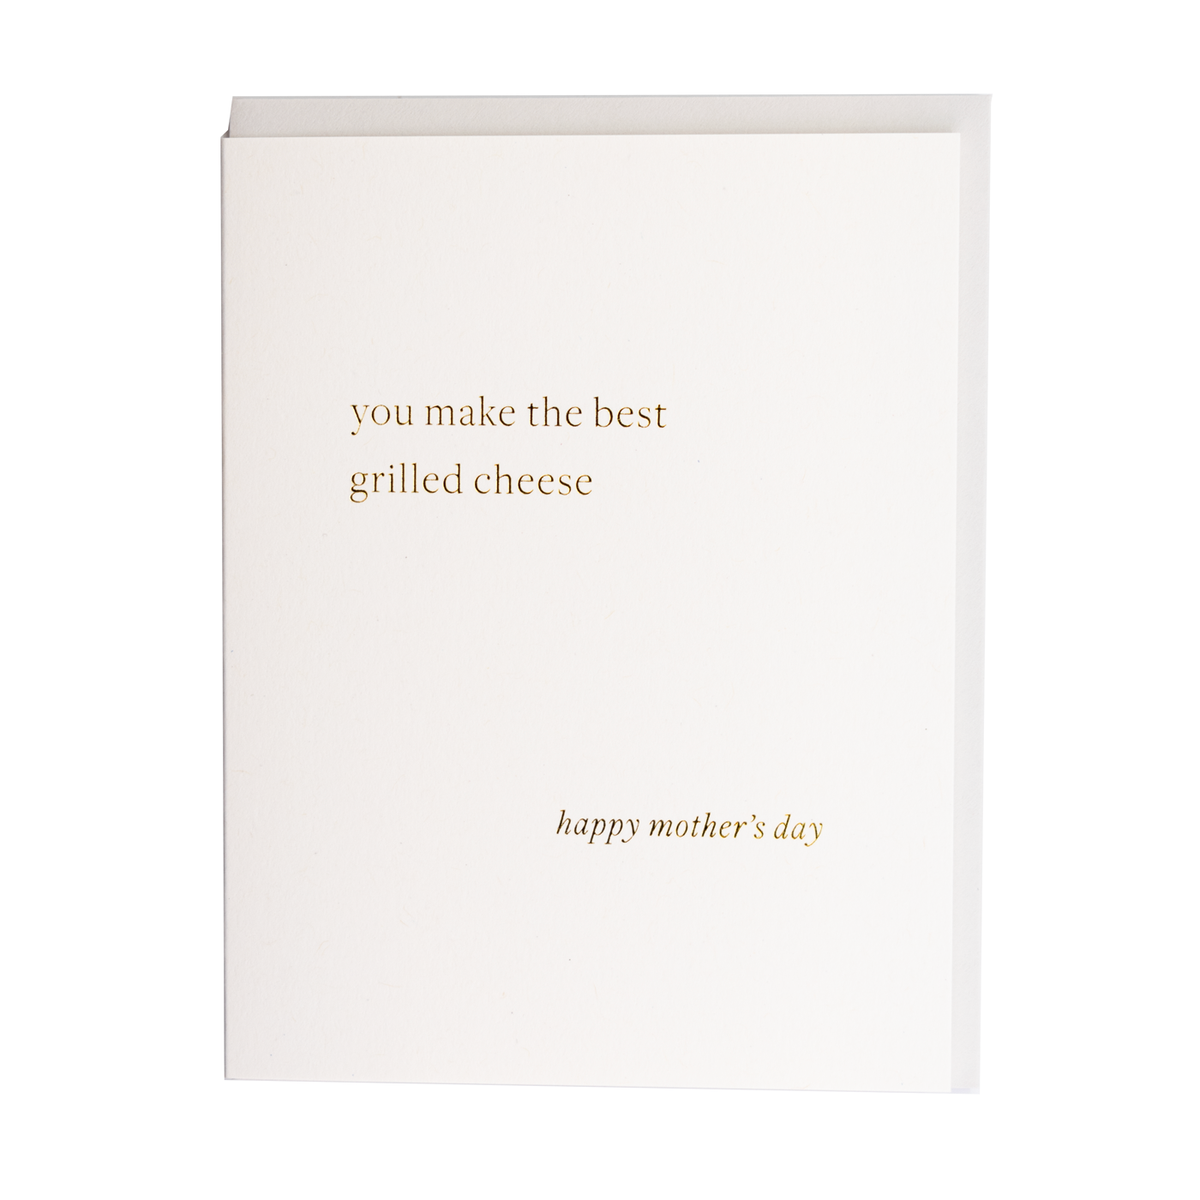 Smitten On Paper - Greeting Card - Grilled Cheese Mom